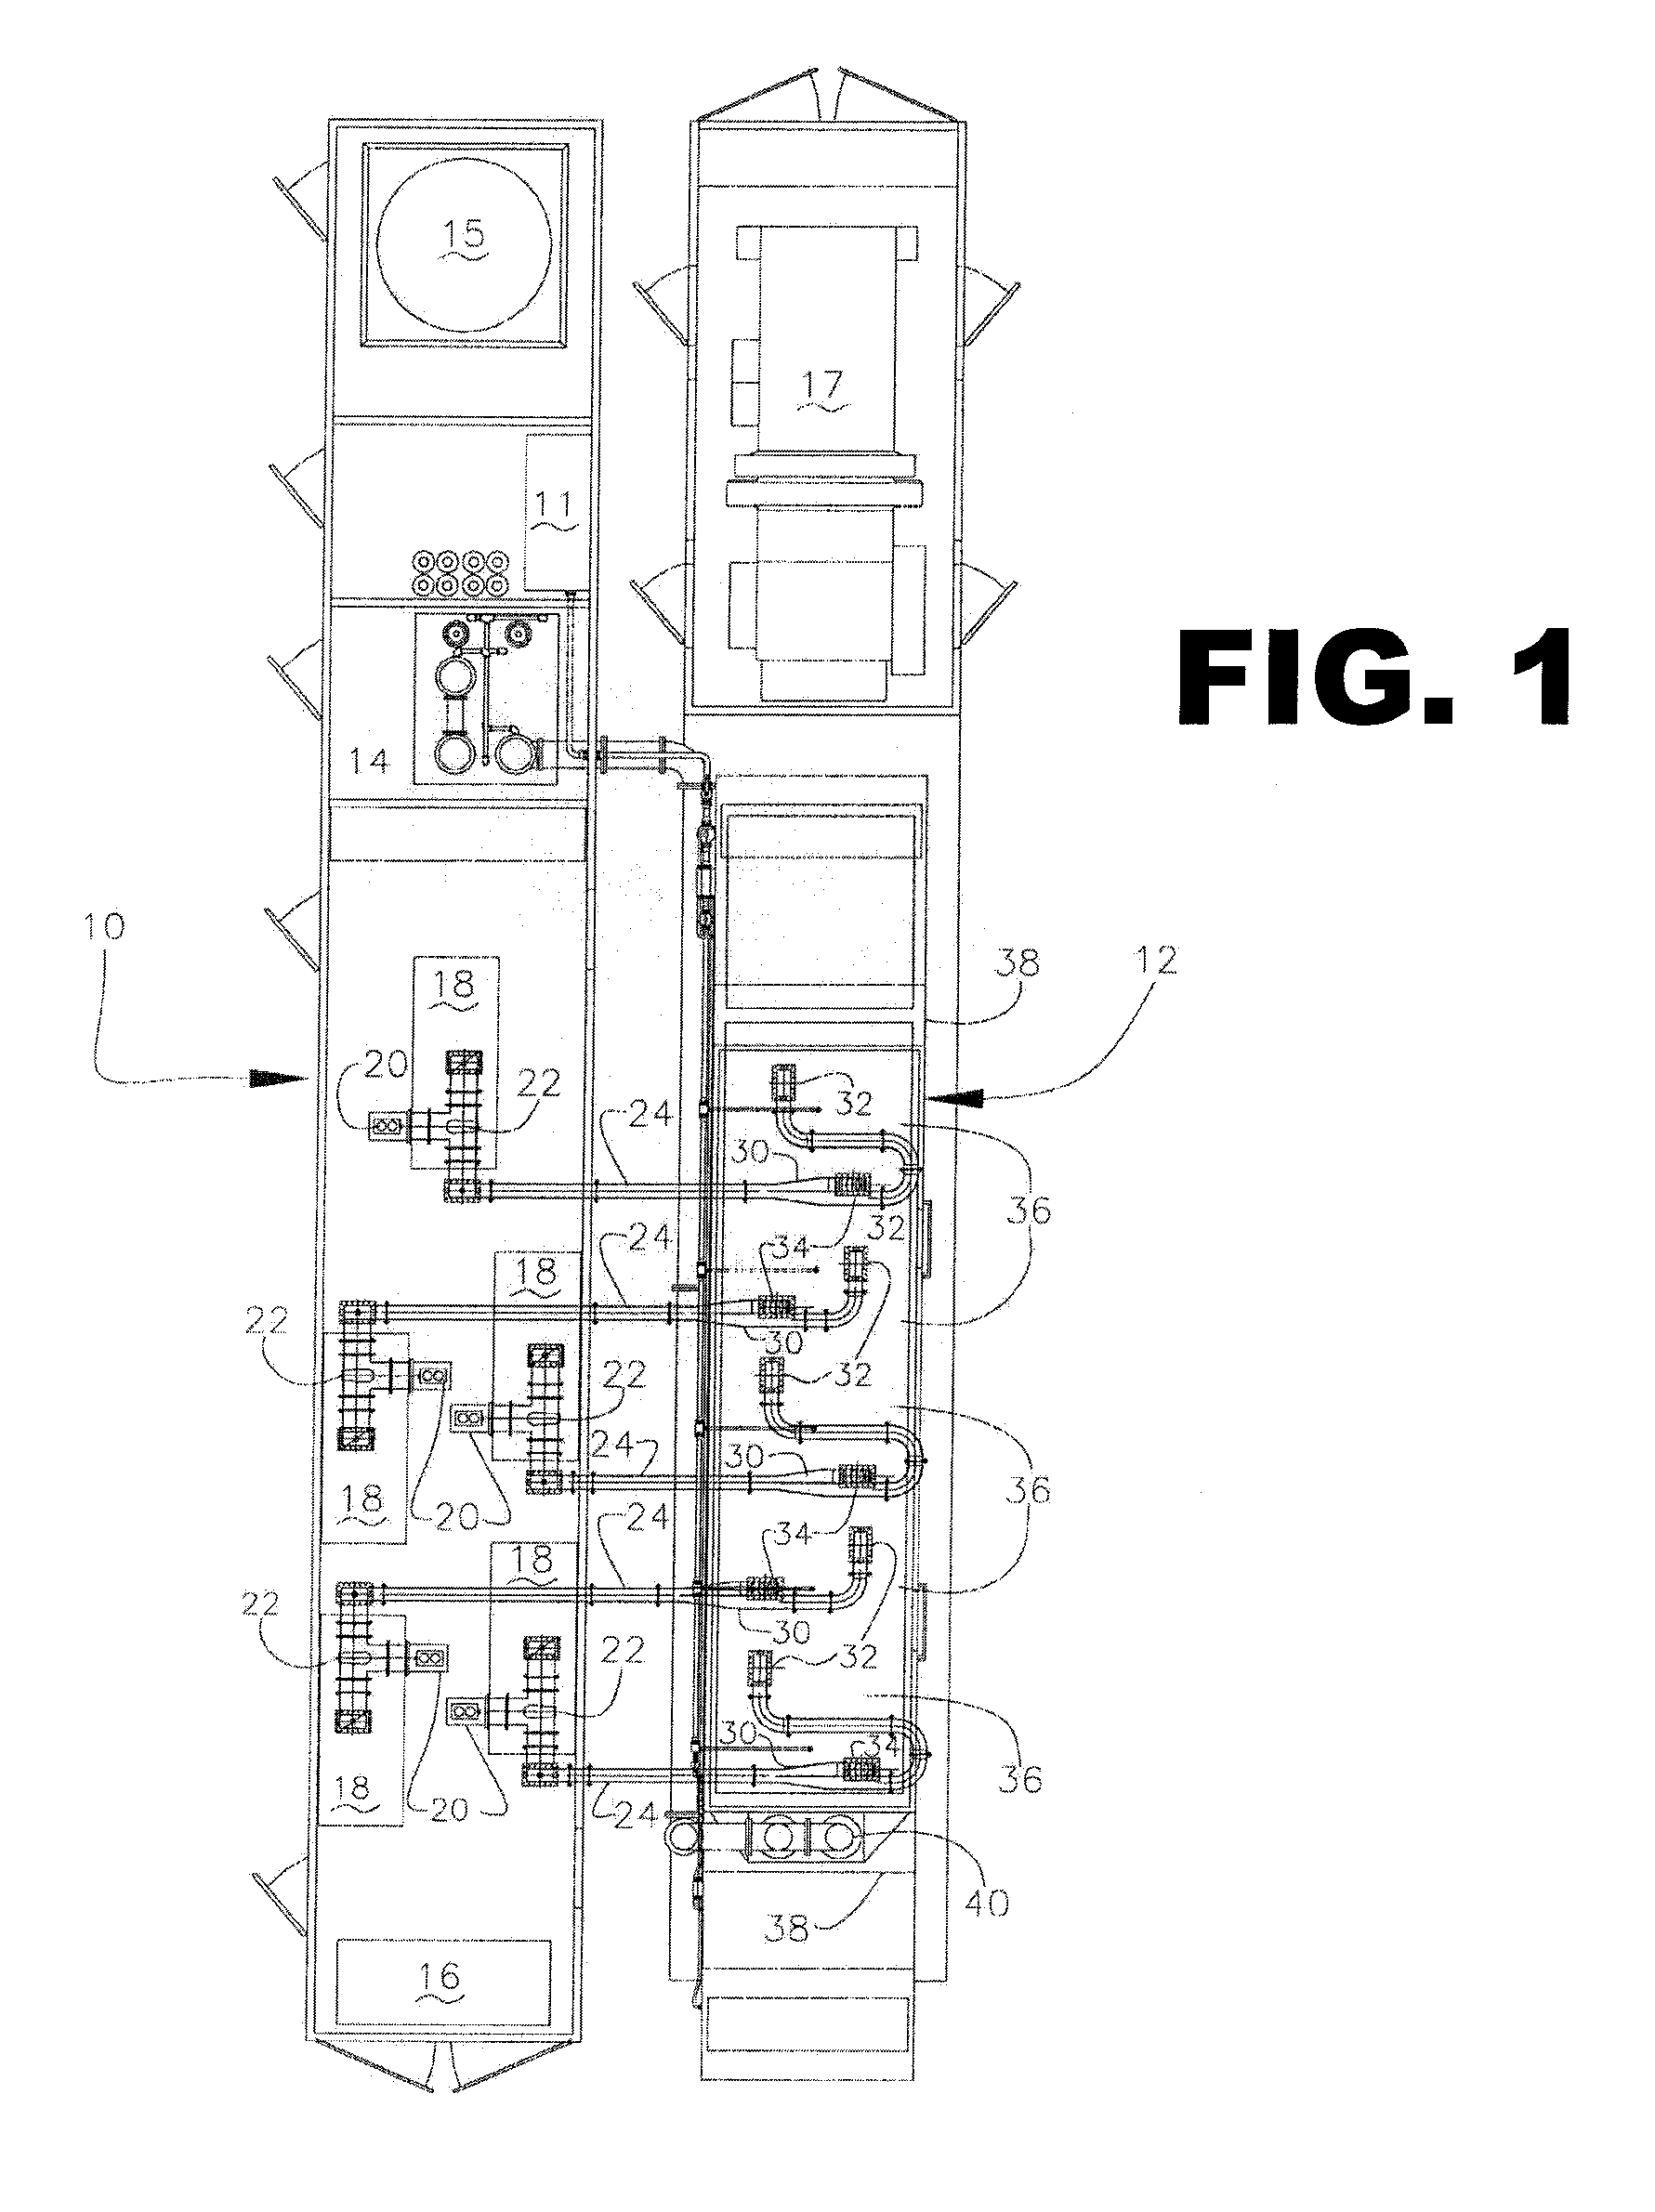 Method and Apparatus for Microwave Reduction of Organic Compounds